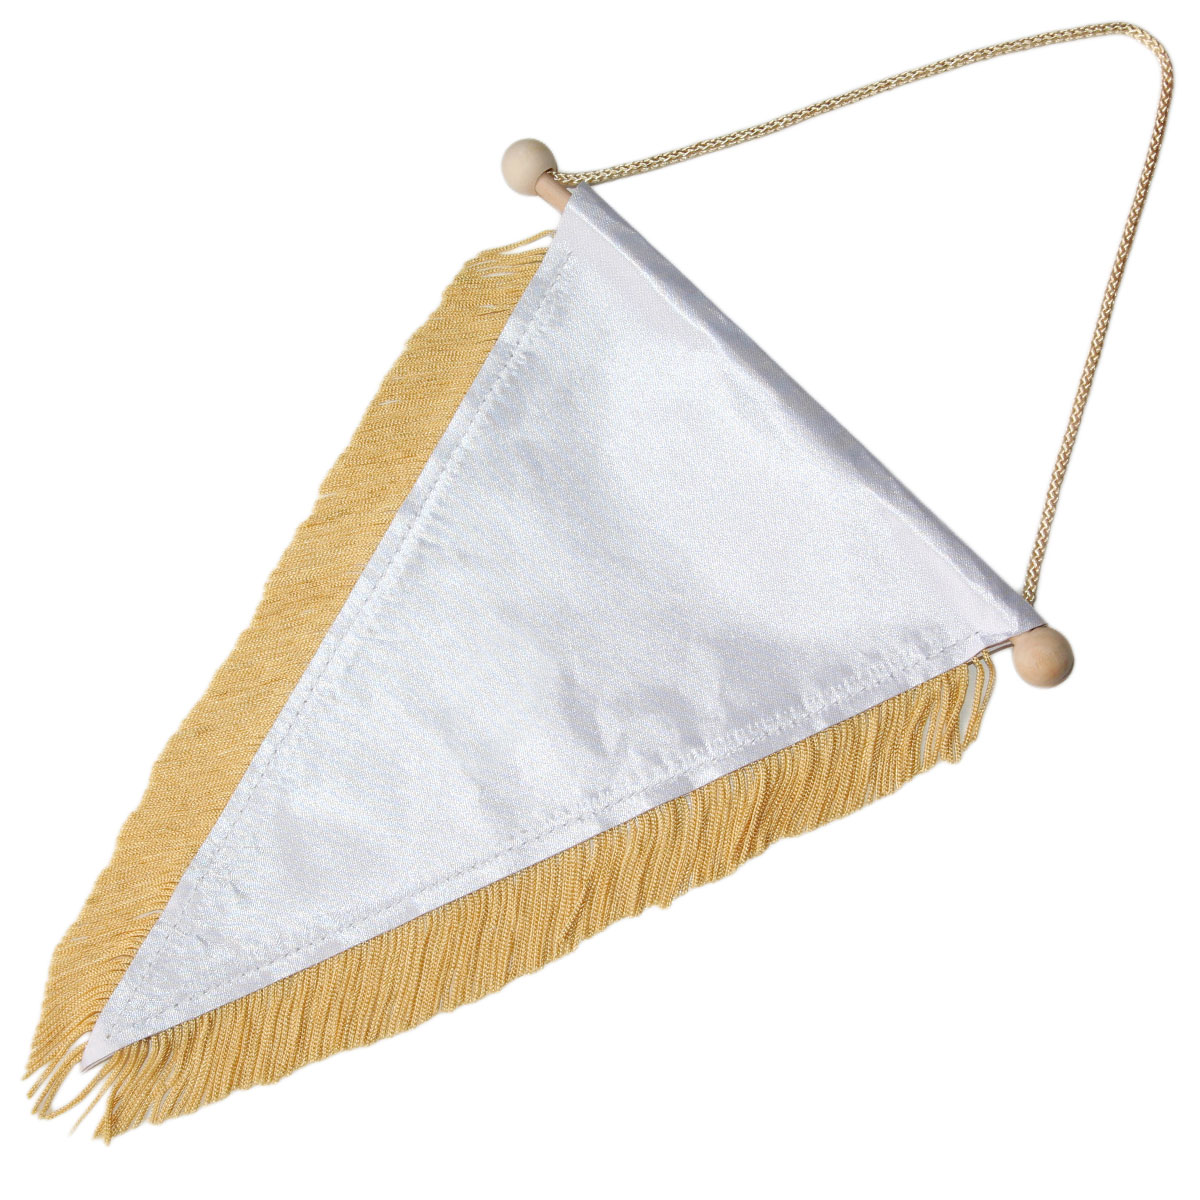 Triangular pennant with gold fringes for sublimation